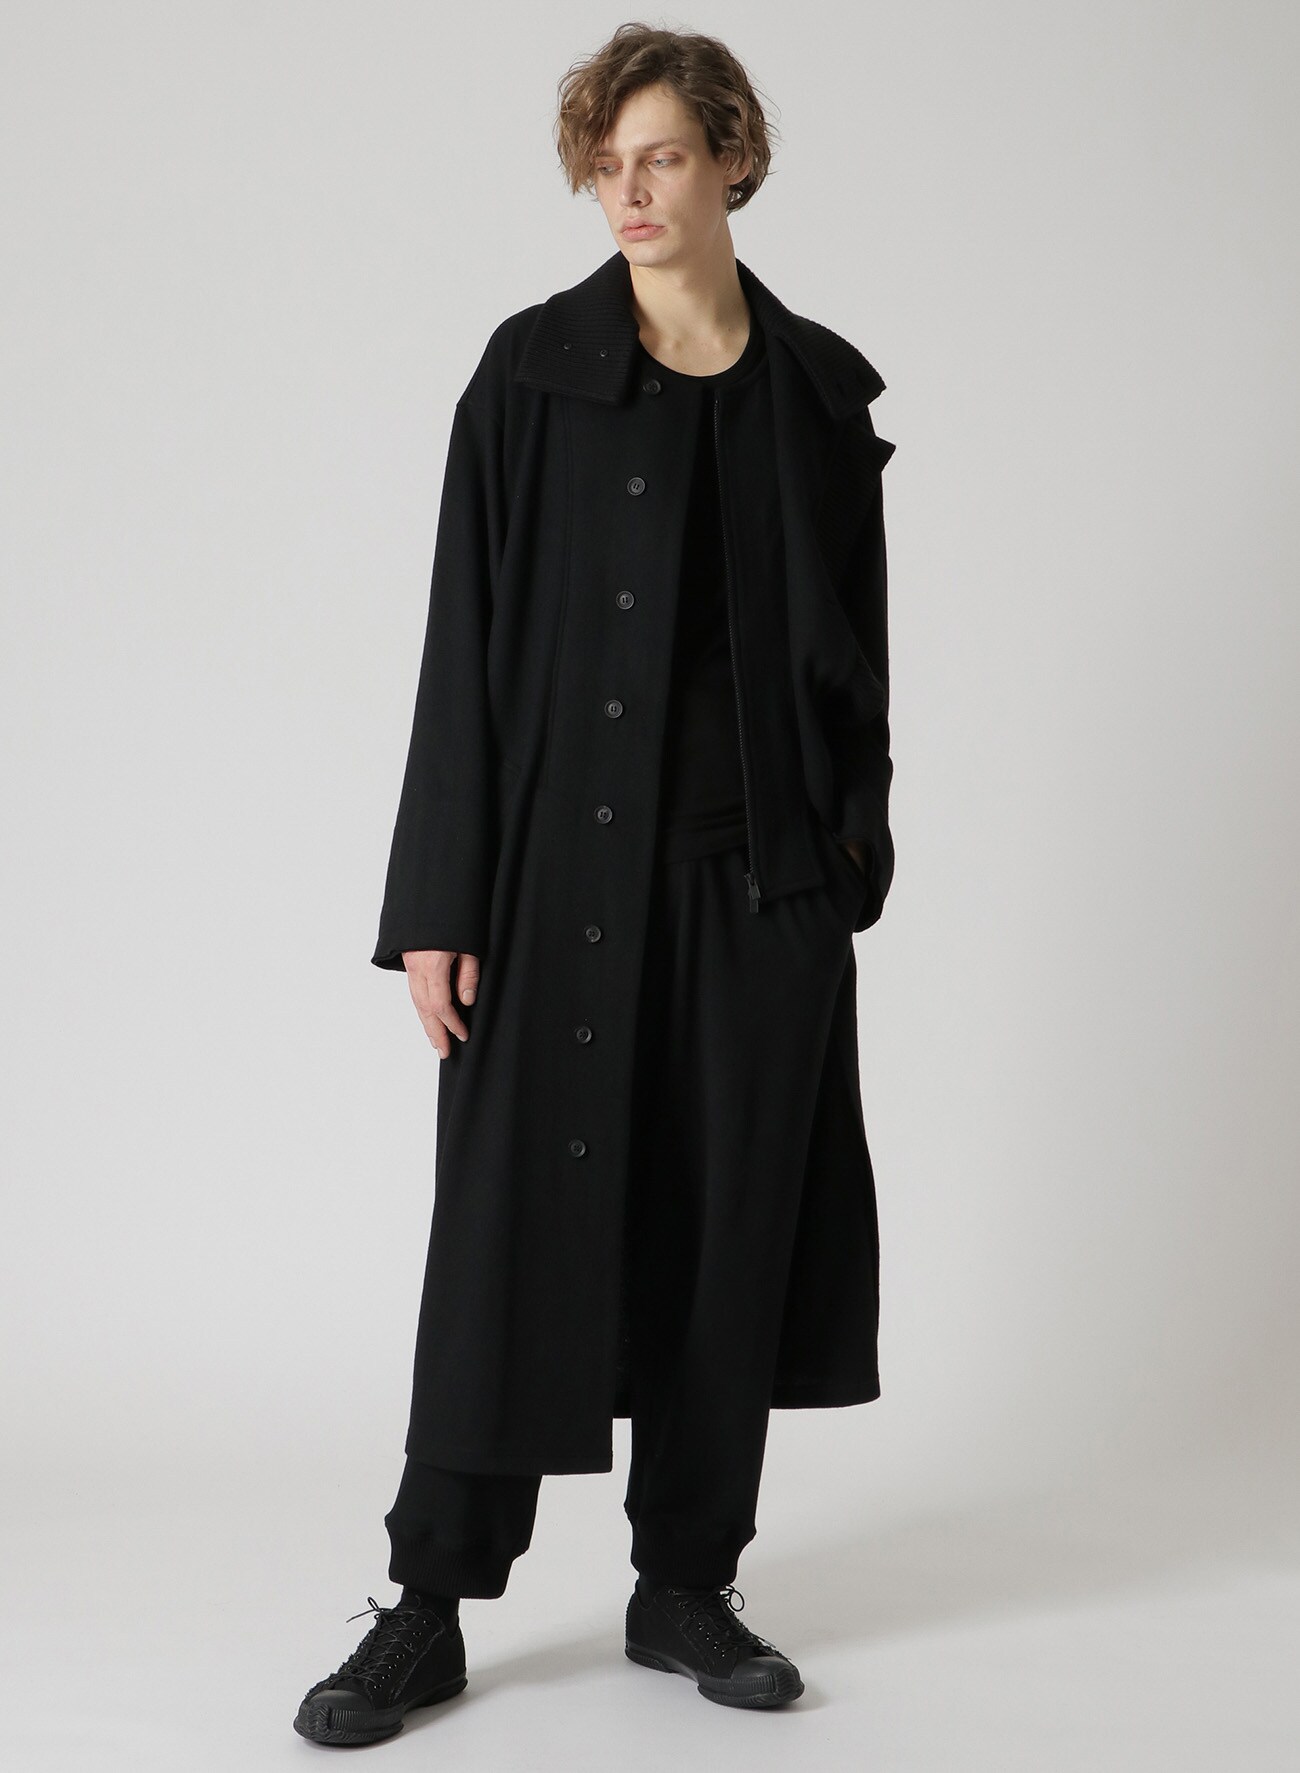 SPECIAL SOFT CRADED 1/14 PS LAYERED LIKE LONG COAT(FREE SIZE Black